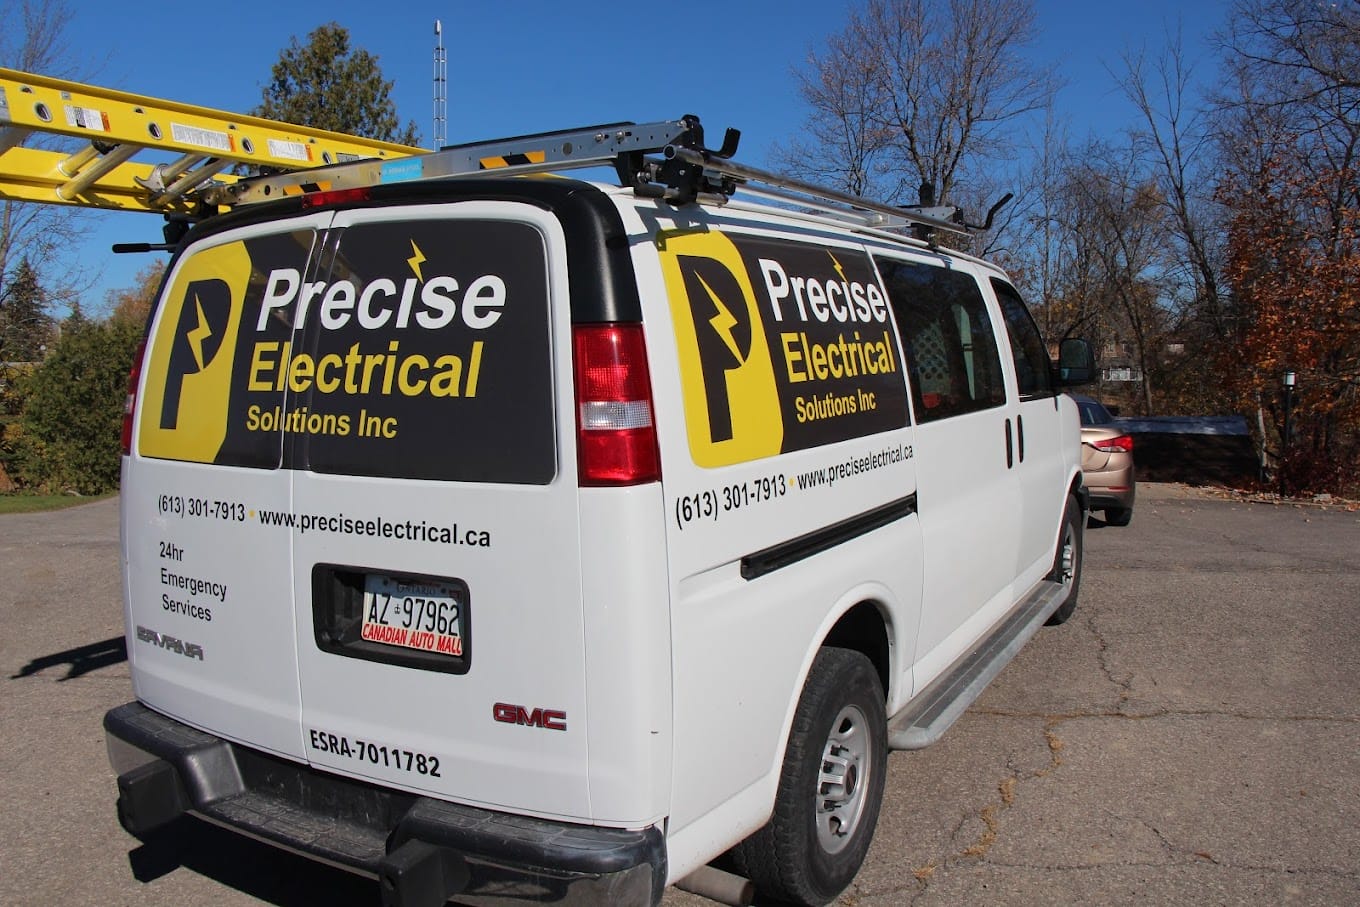 Precise Electrical Solutions van with contact information.